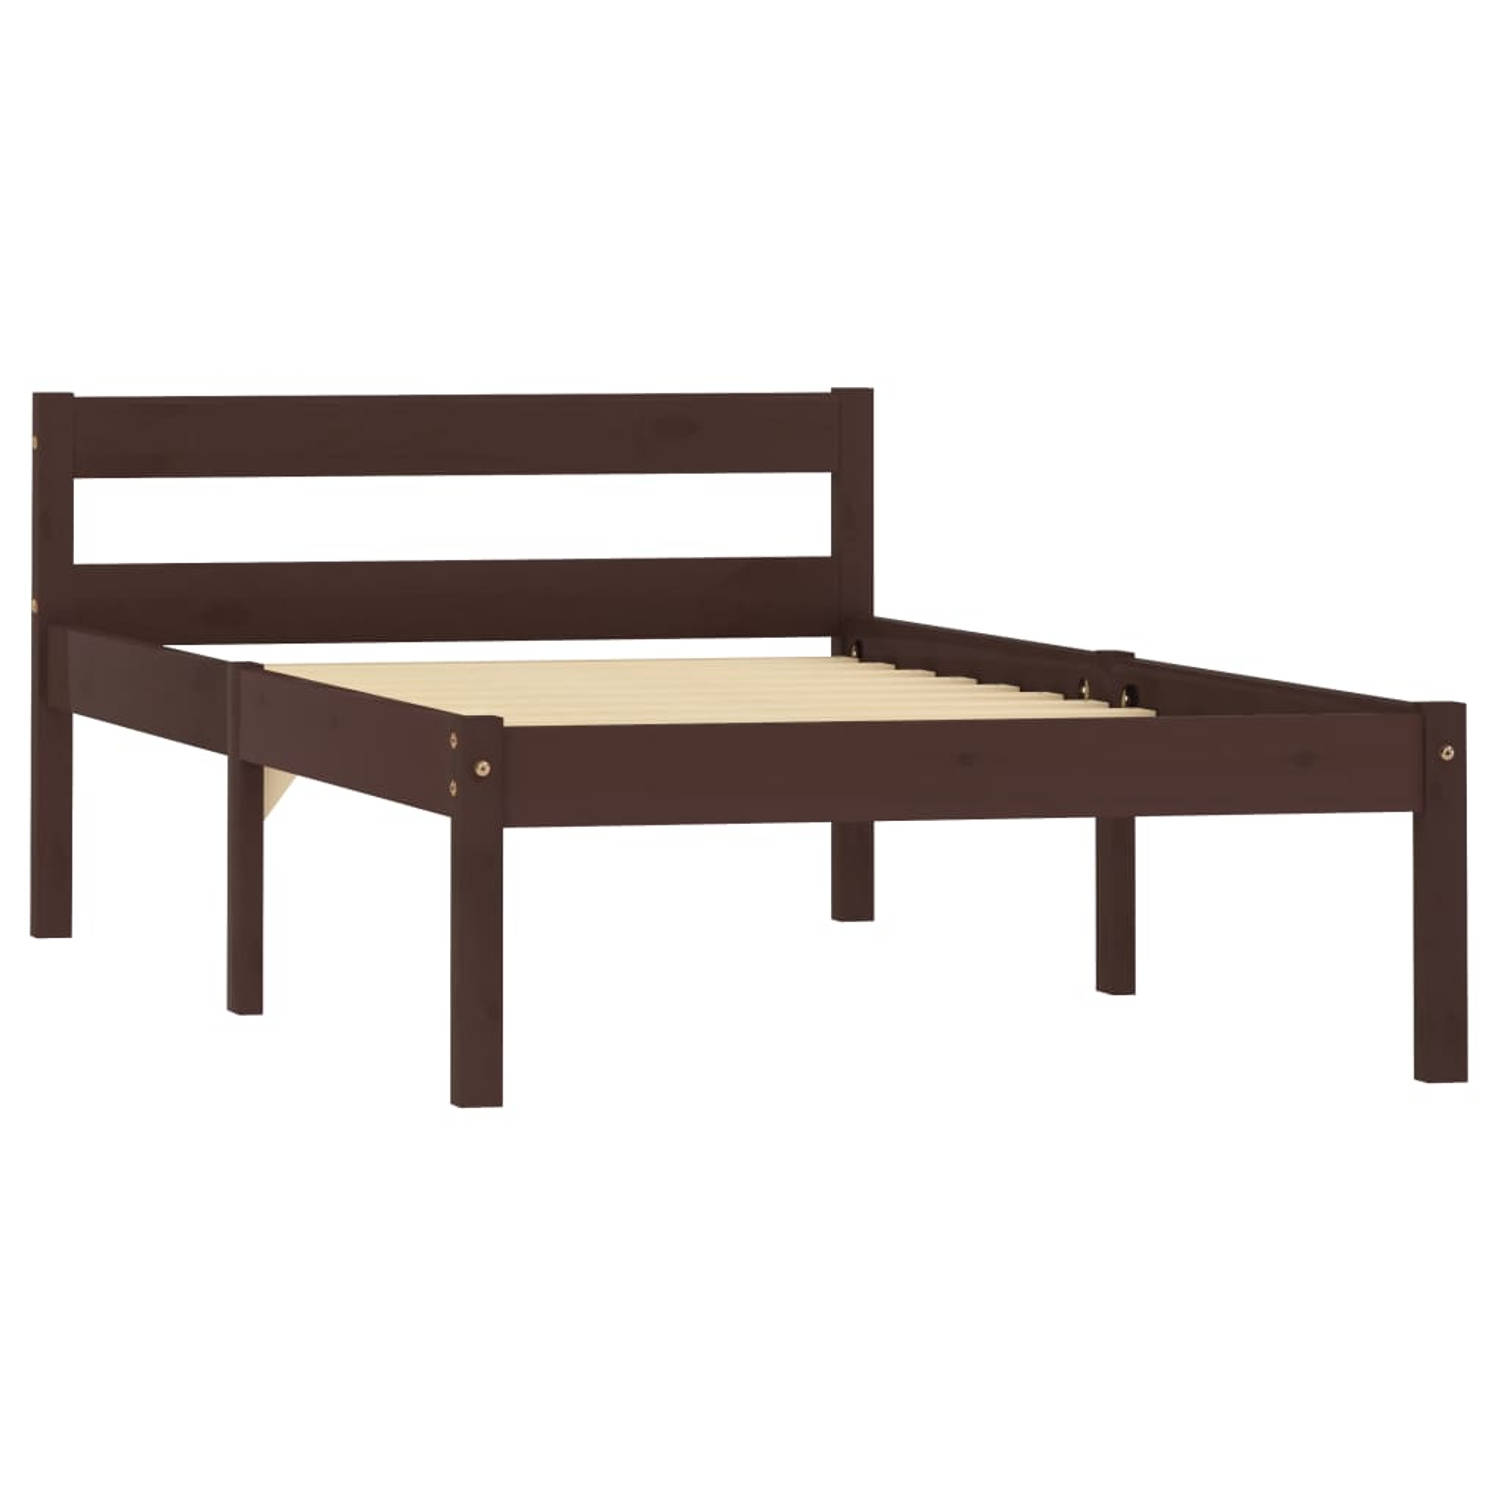 The Living Store Bedframe massief grenenhout donkerbruin 90x200 cm - Bed